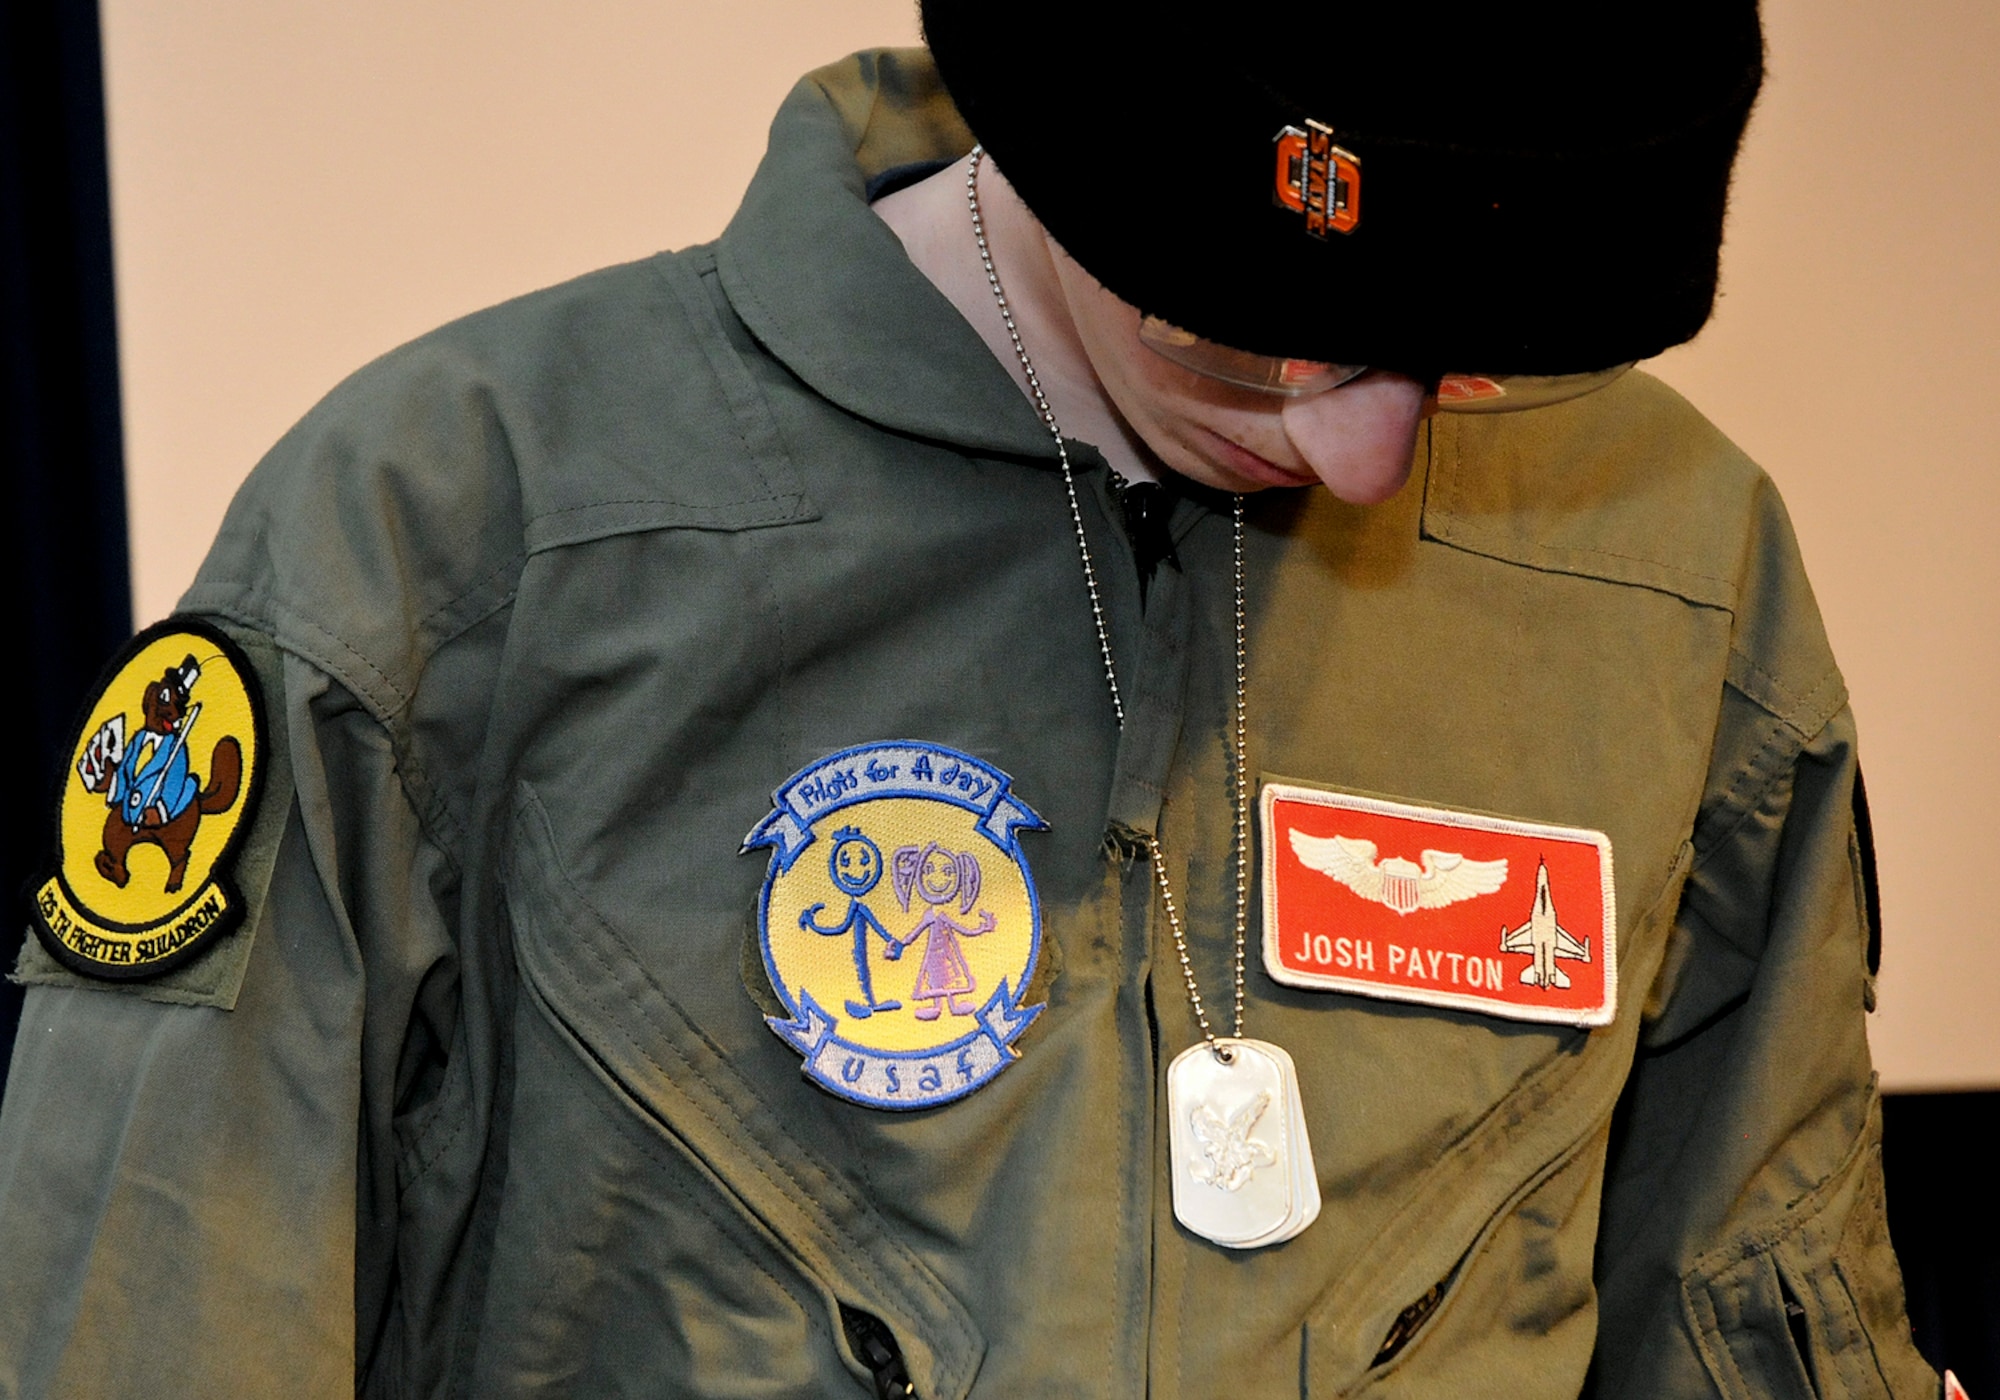 Josh Payton, "pilot for a day" admires his new dog tags while serving as an honored guest of the 138th Fighter Wing Feb. 19, 2015, at the Tulsa Air National Guard base, Tulsa, Okla.  The pilot for a day program is intended to recognize and honor children with potentially life threatening illnesses and started at the 138th in May 2012, and has hosted seven children since it began.  (U.S. National Guard photo by Senior Master Sgt.  Preston L. Chasteen/Released)